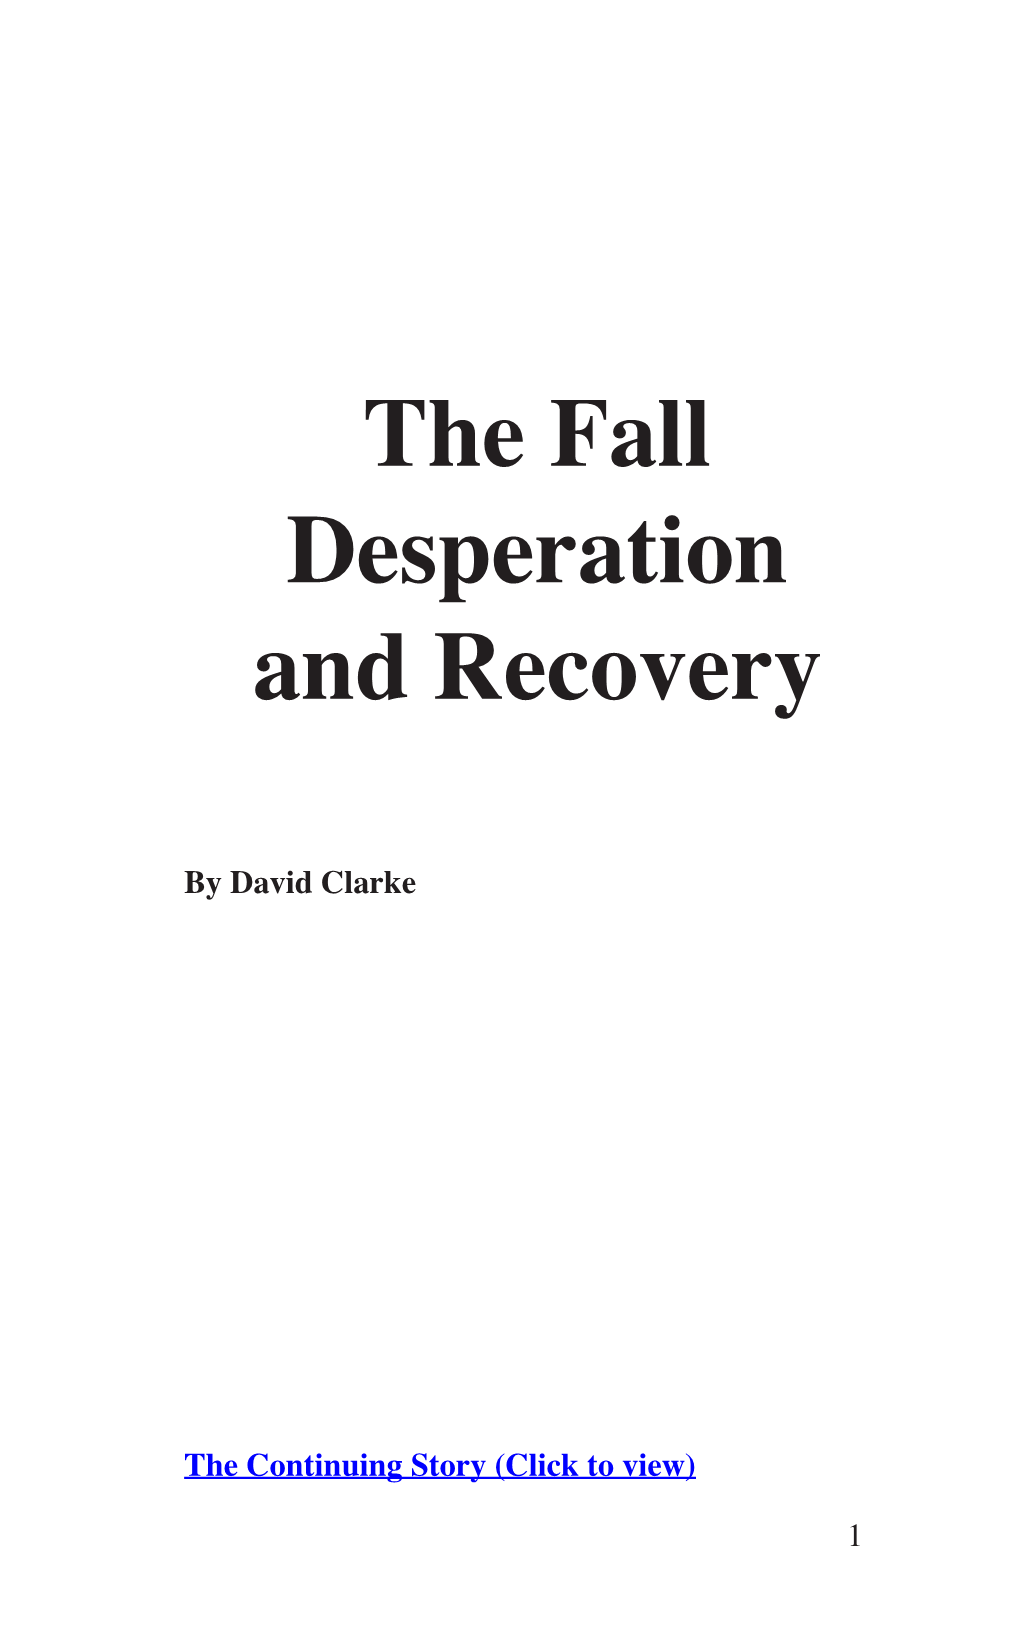 The Fall Desperation and Recovery